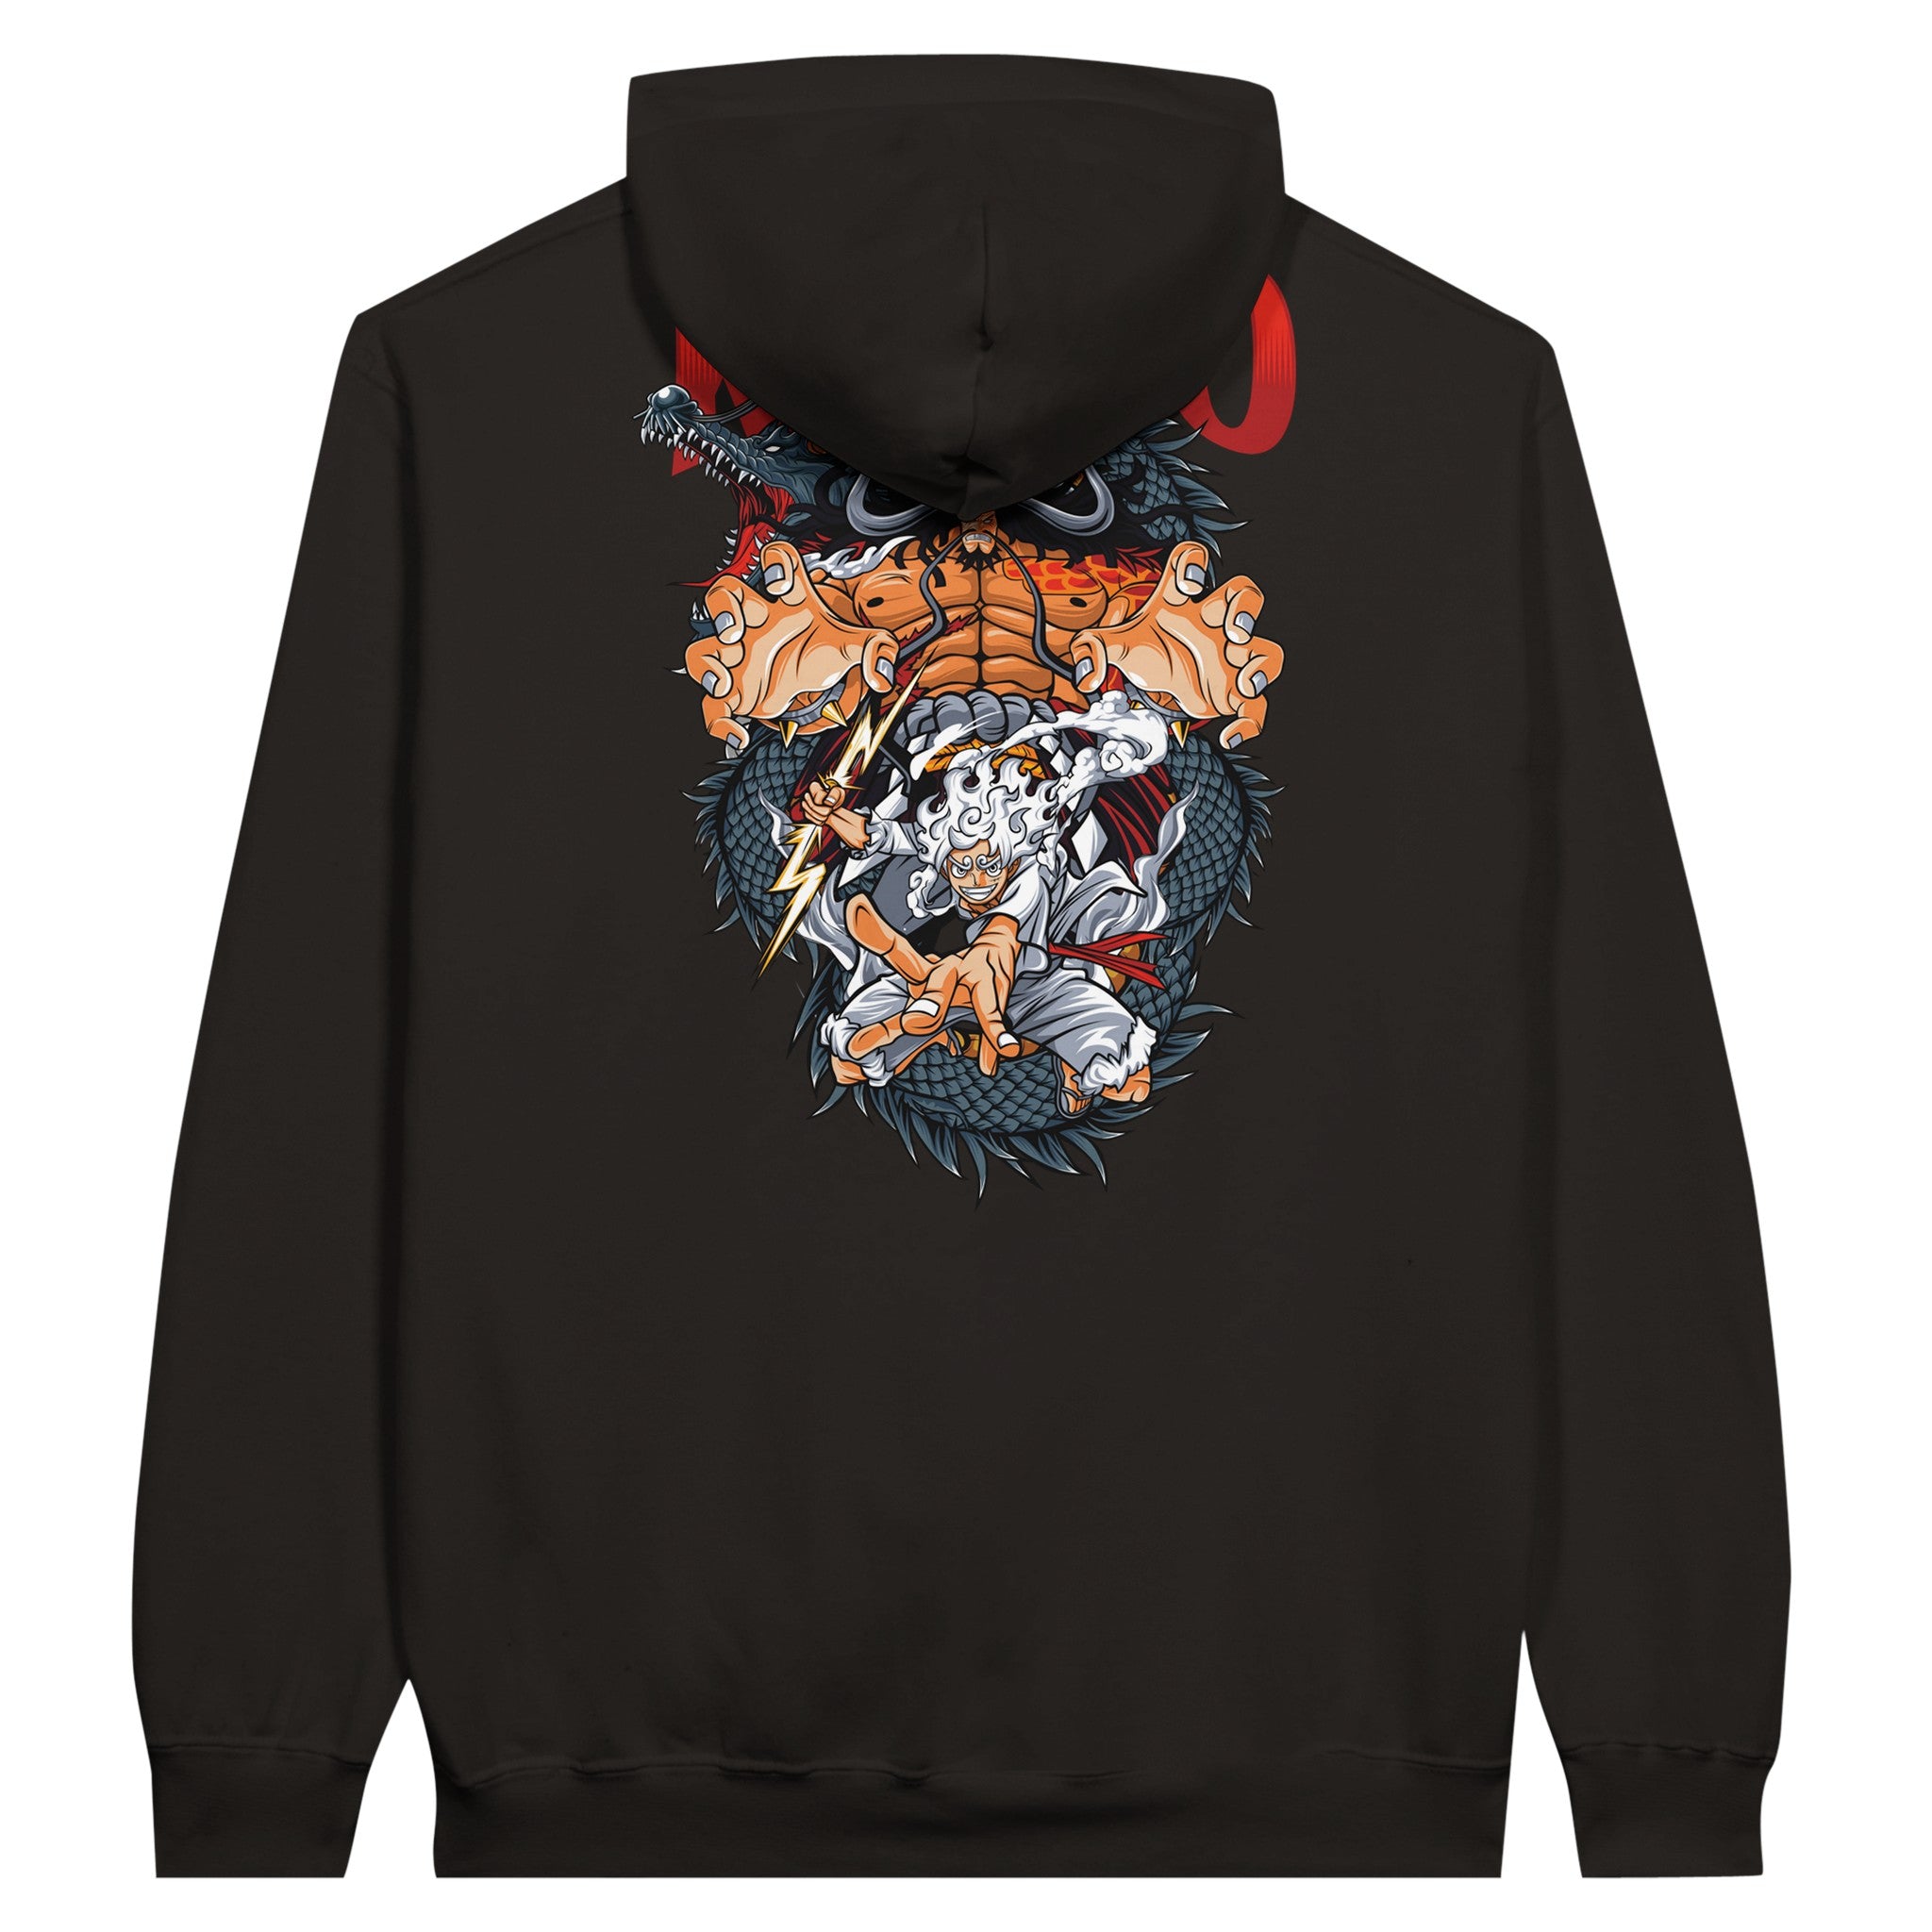 shop and buy one piece anime clothing kaido vs luffy hoodie